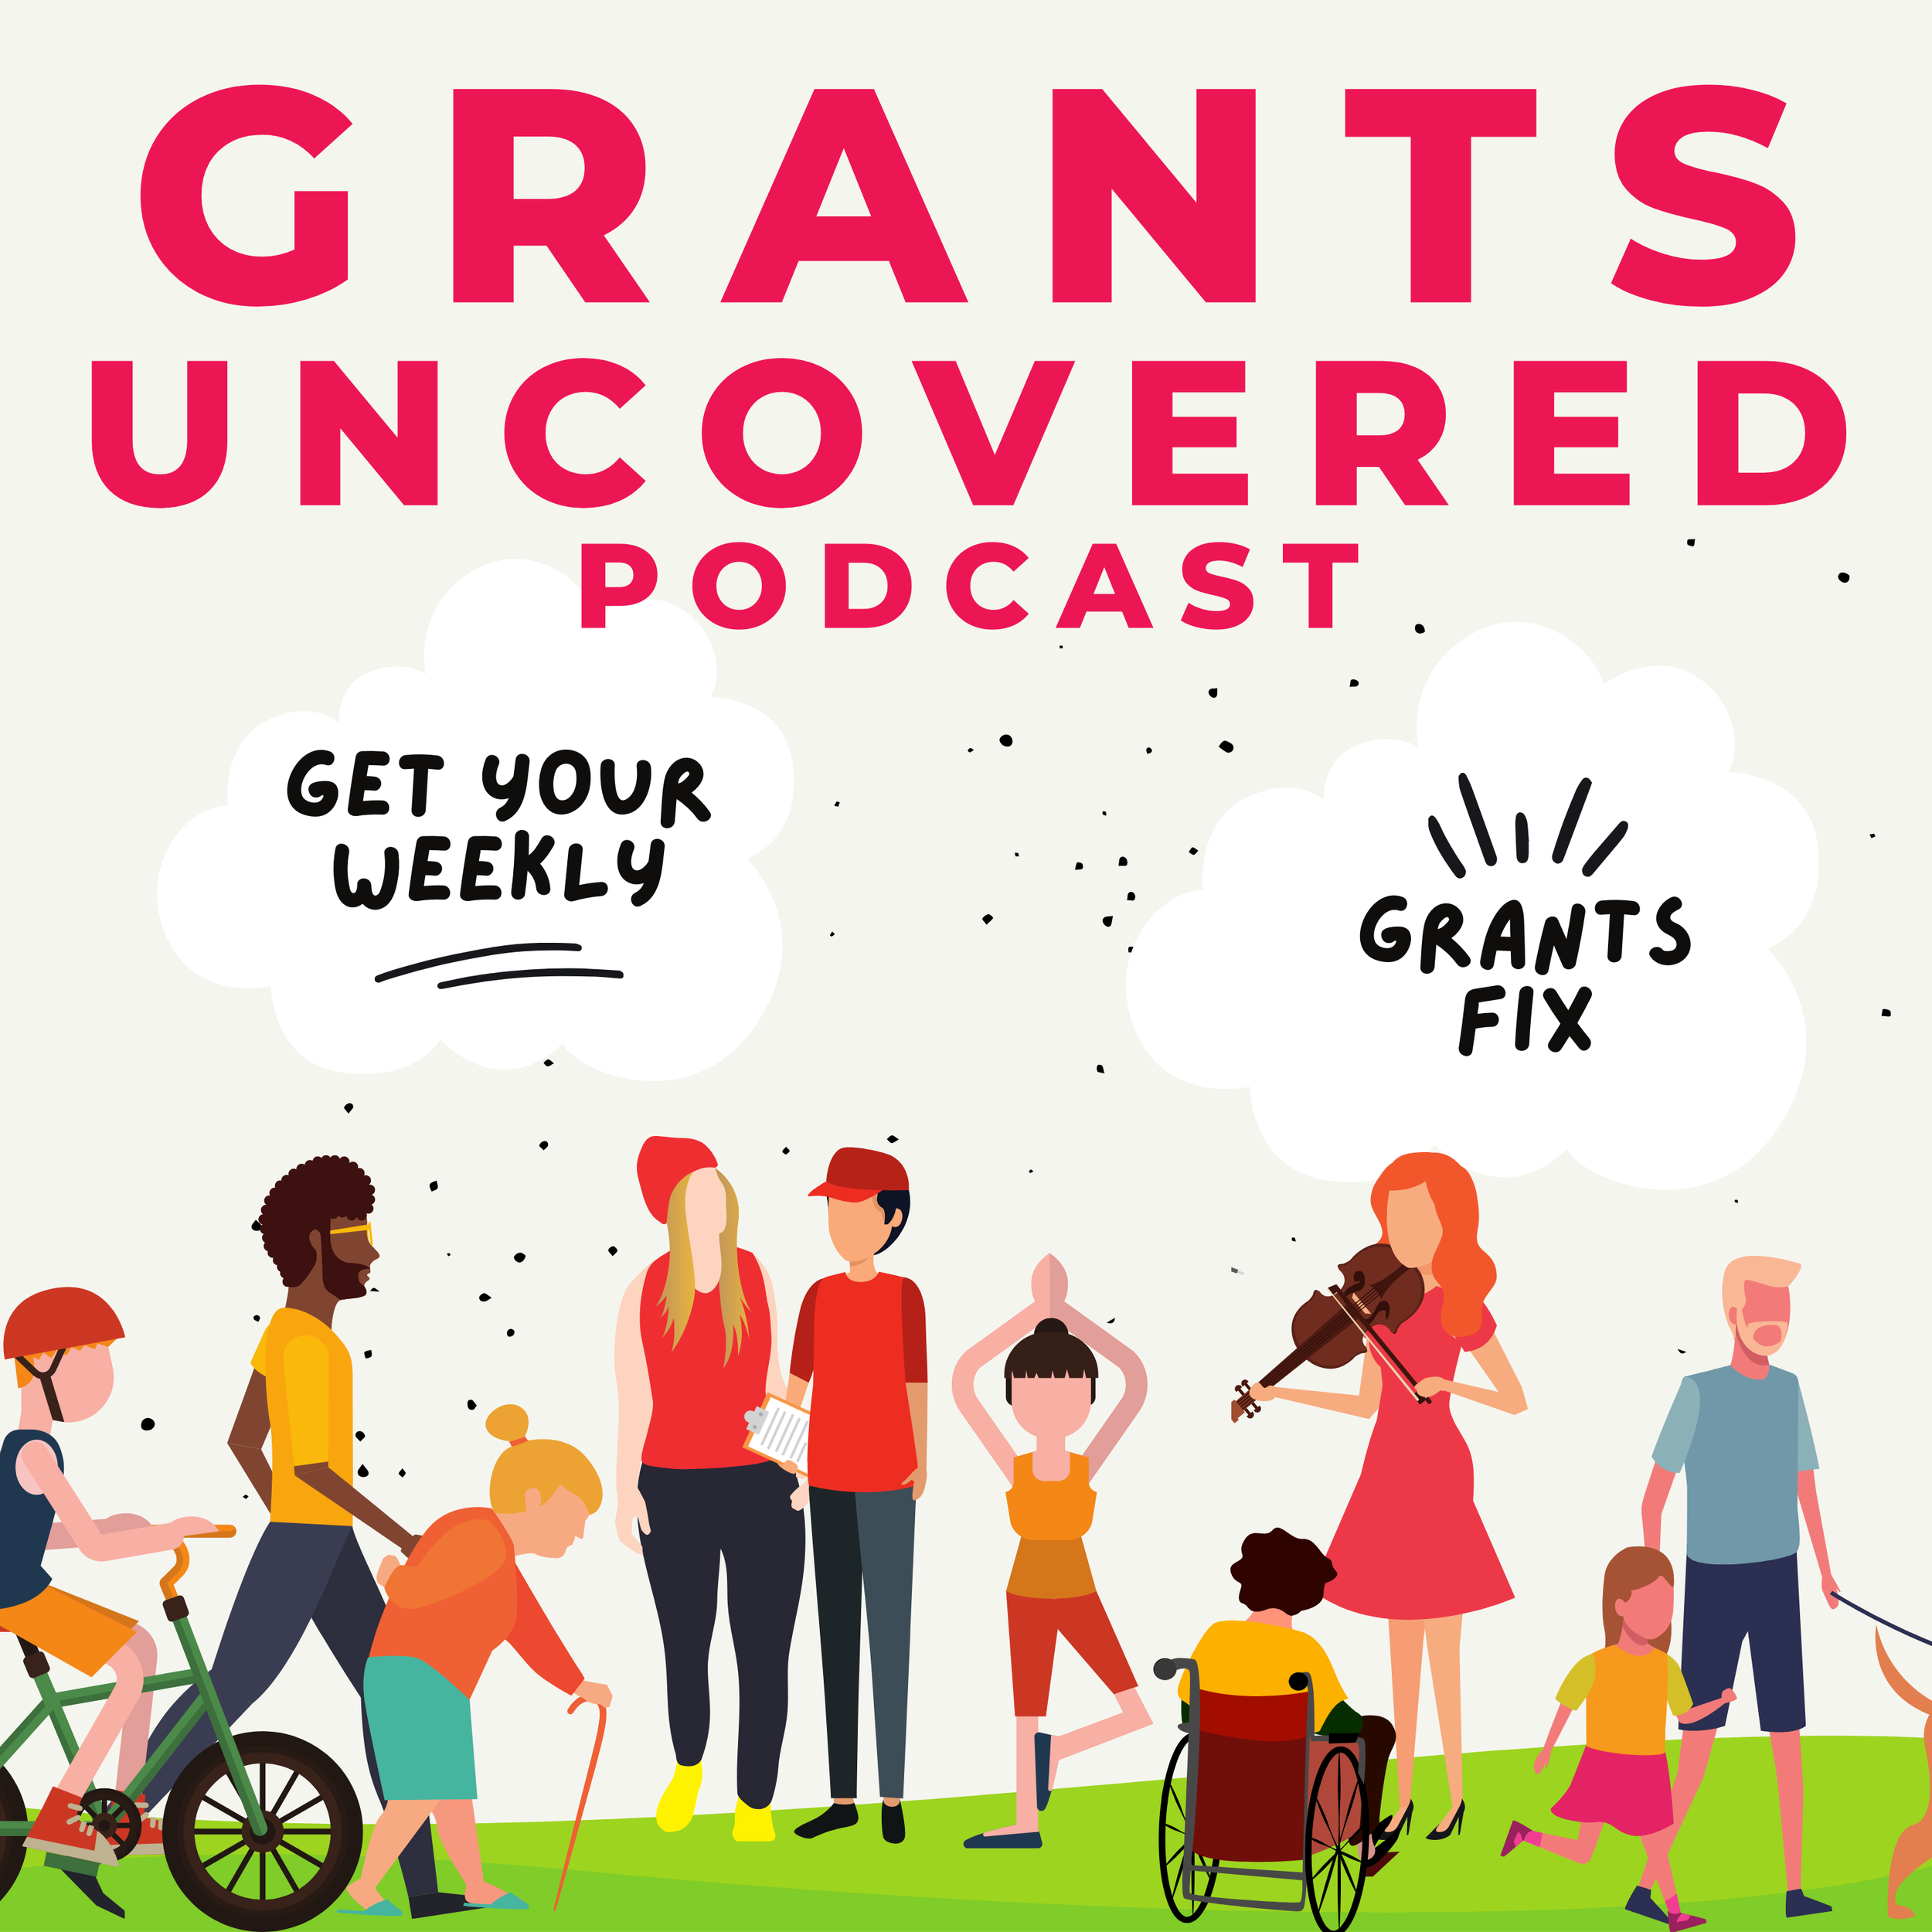 Grants Uncovered Podcast. Get your weekly grants fix.